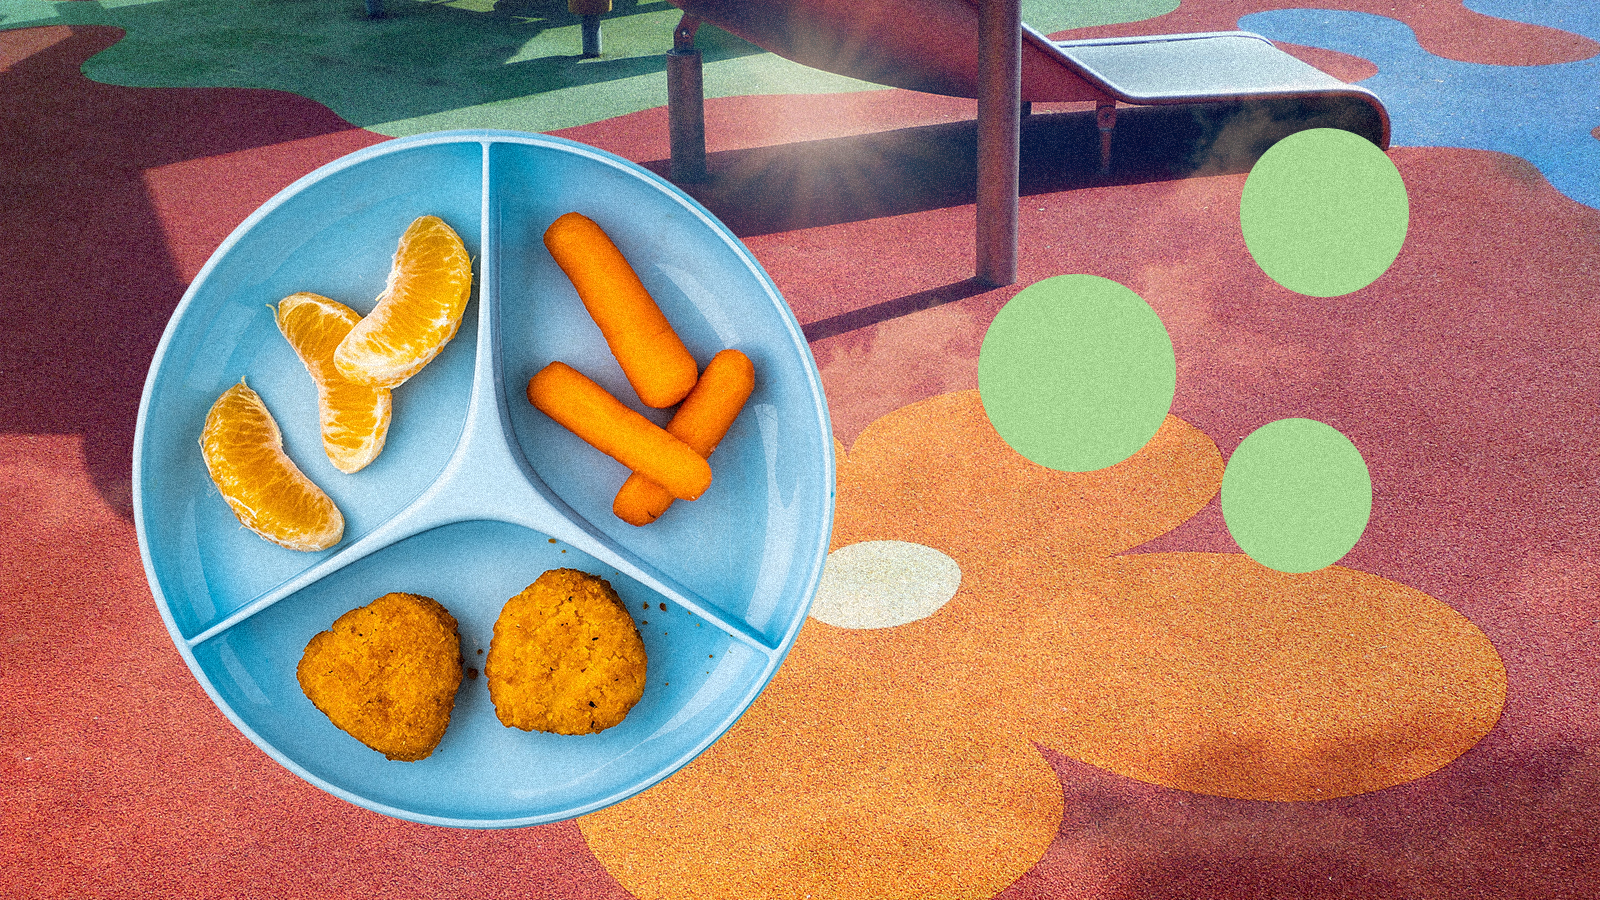 A divided plate with chicken nuggets, baby carrots and citrus slices on a background of colorful a playground surface